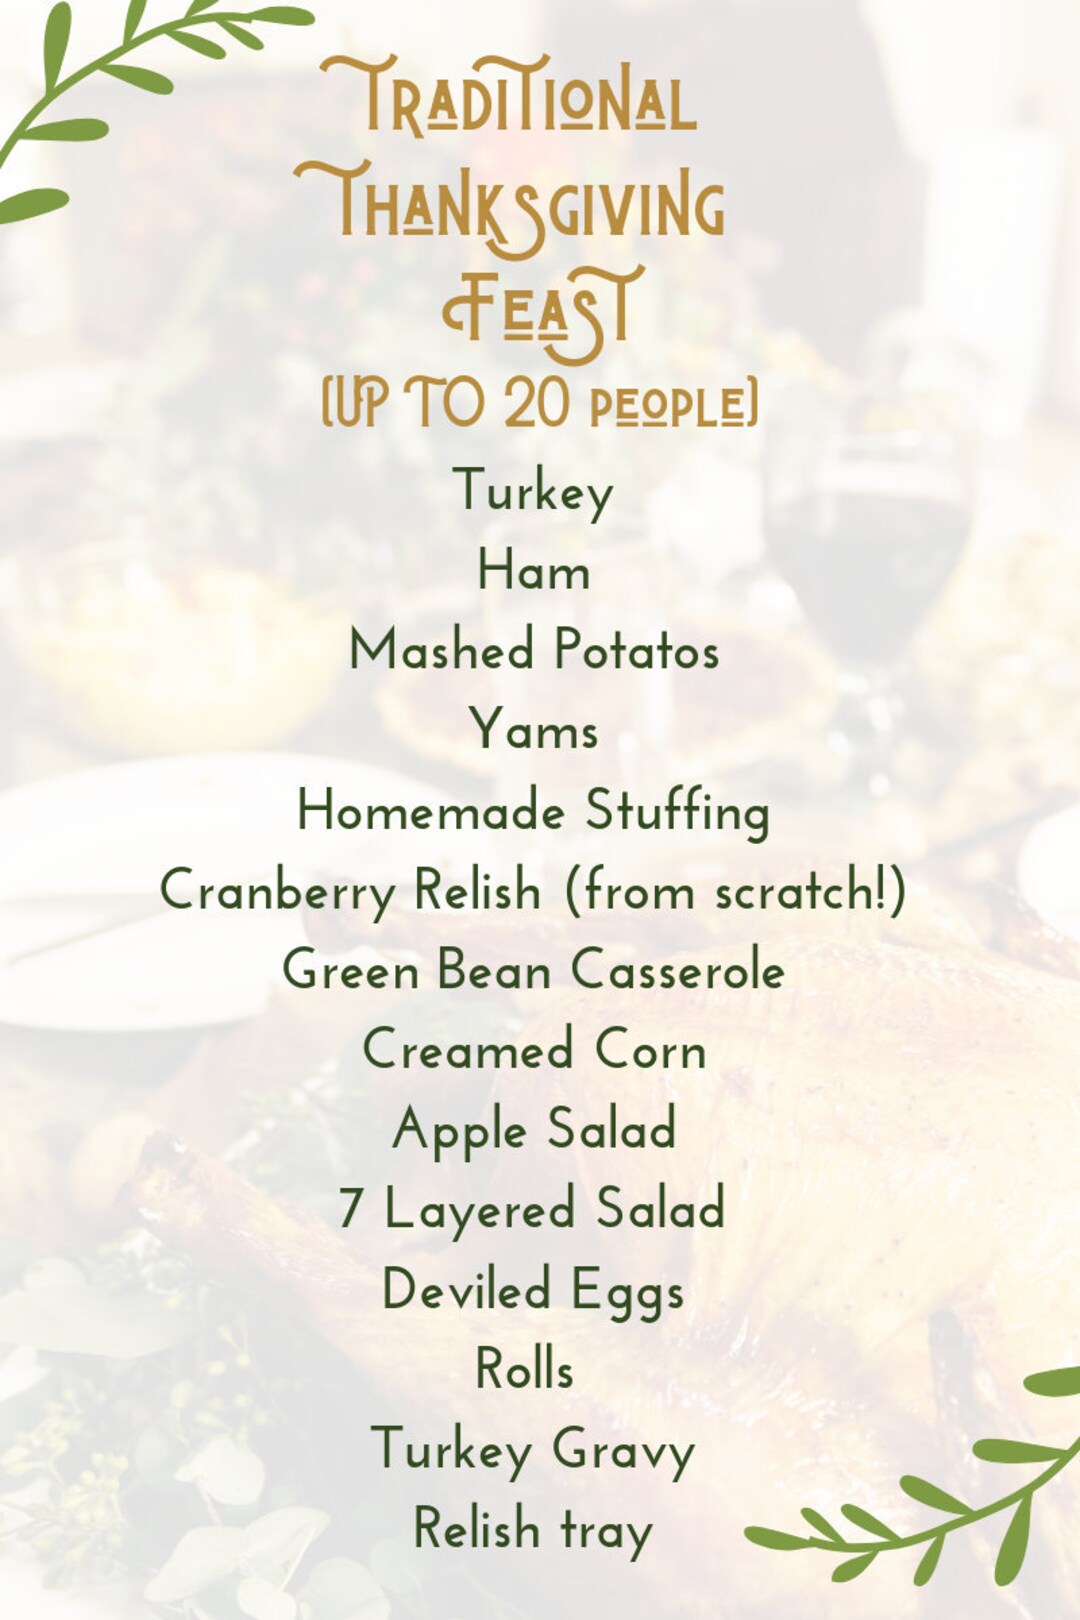 Step-by-step Guide for Hosting a Thanksgiving Feast - Etsy